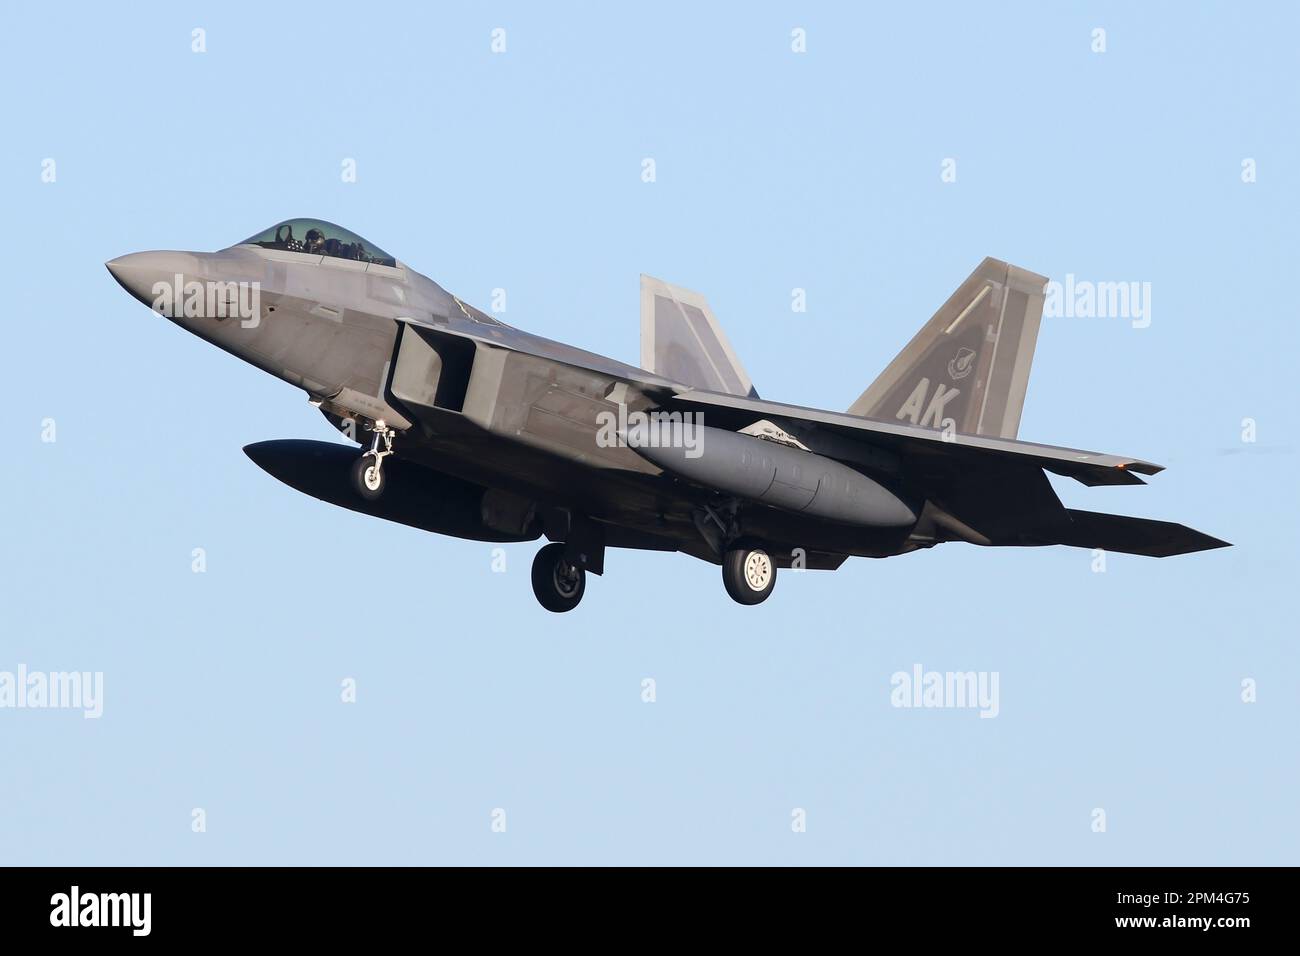 F-22A Raptor from the 3rd Fighter Wing at Elmendorf AFB in Alaska arriving at RAF Lakenheath enroute home following a European deployment. Stock Photo